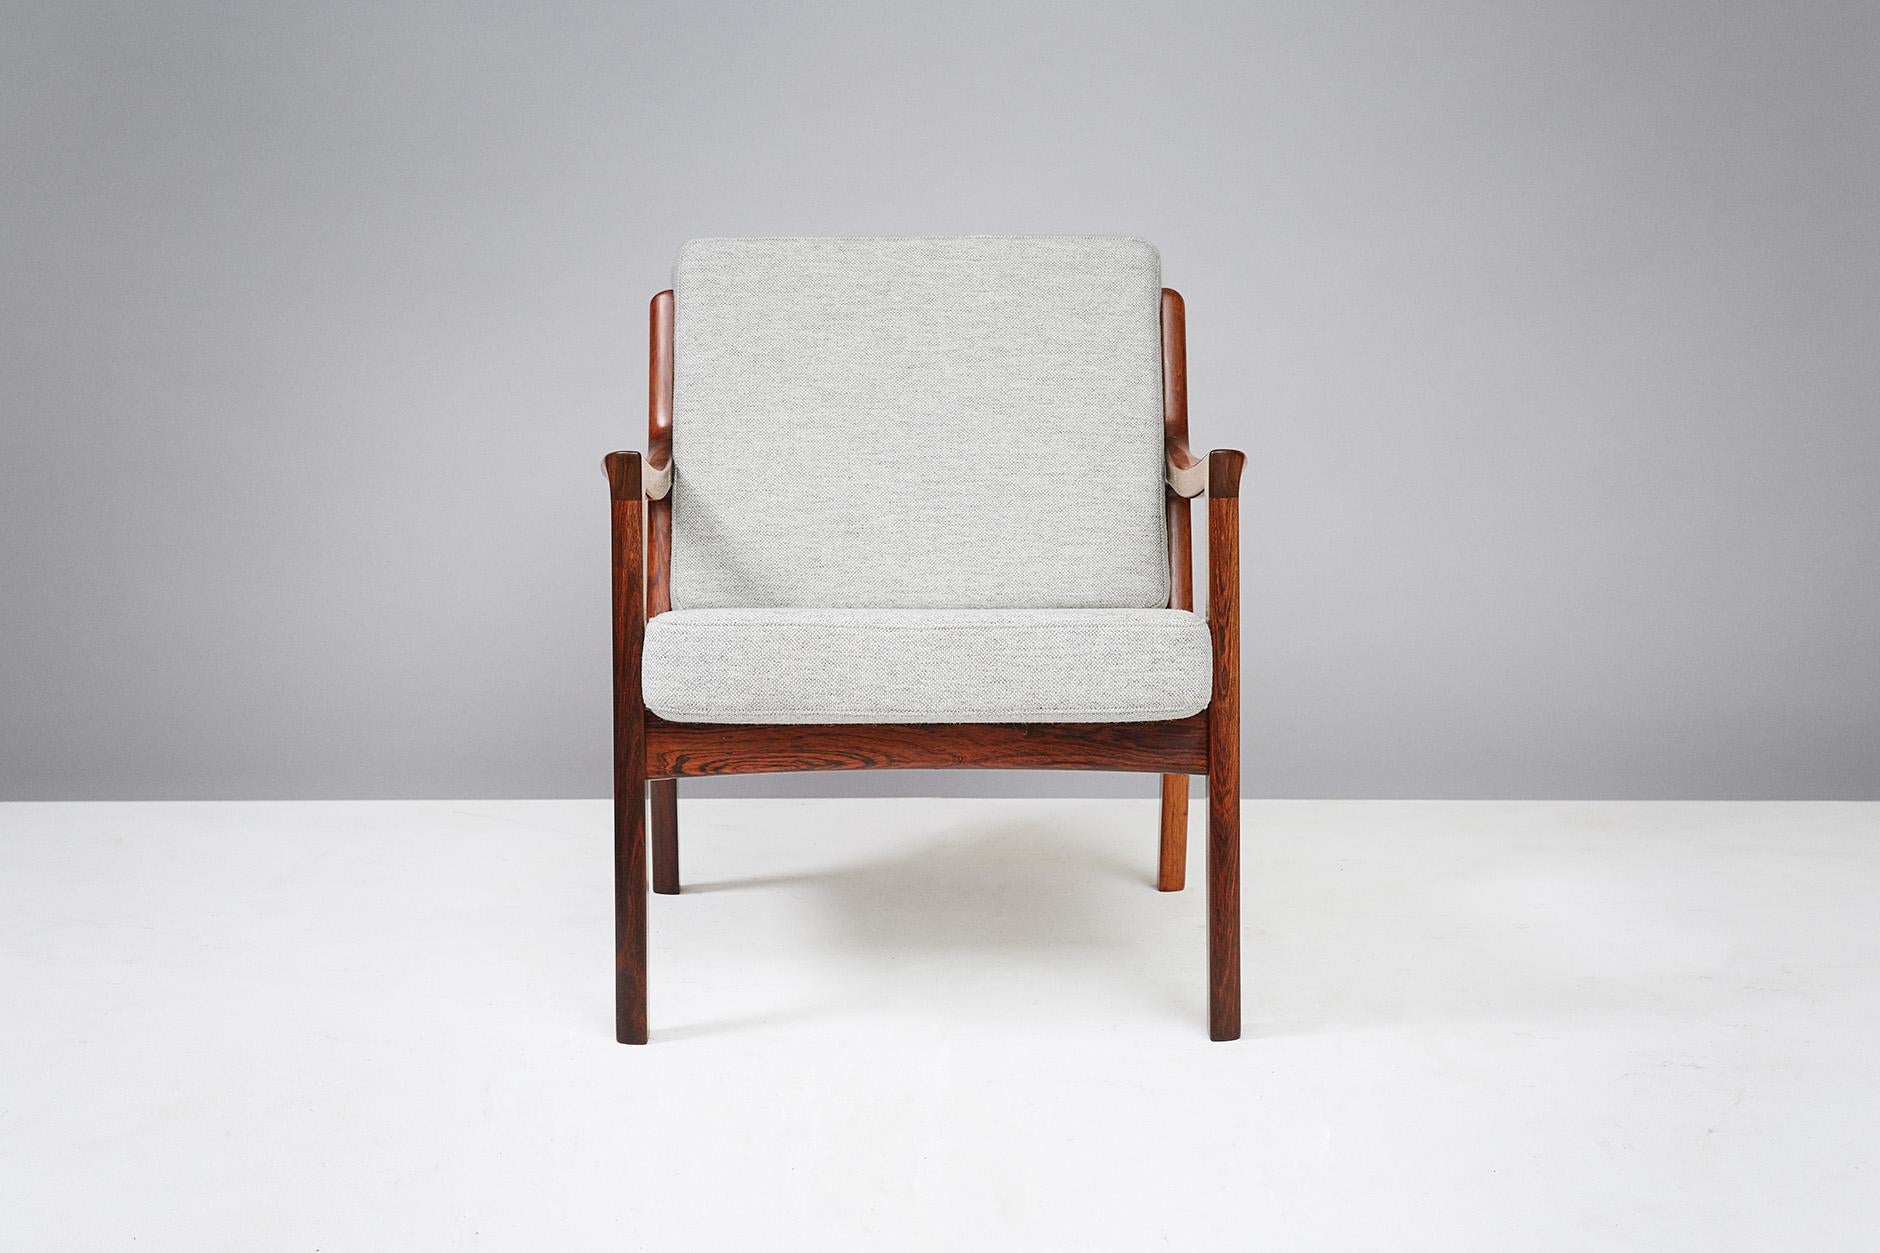 Limited edition version produced by France & Son, Denmark in Brazilian rosewood. Includes maker's badge. New cushions covered in Kvadrat Hallingdal wool fabric.

 